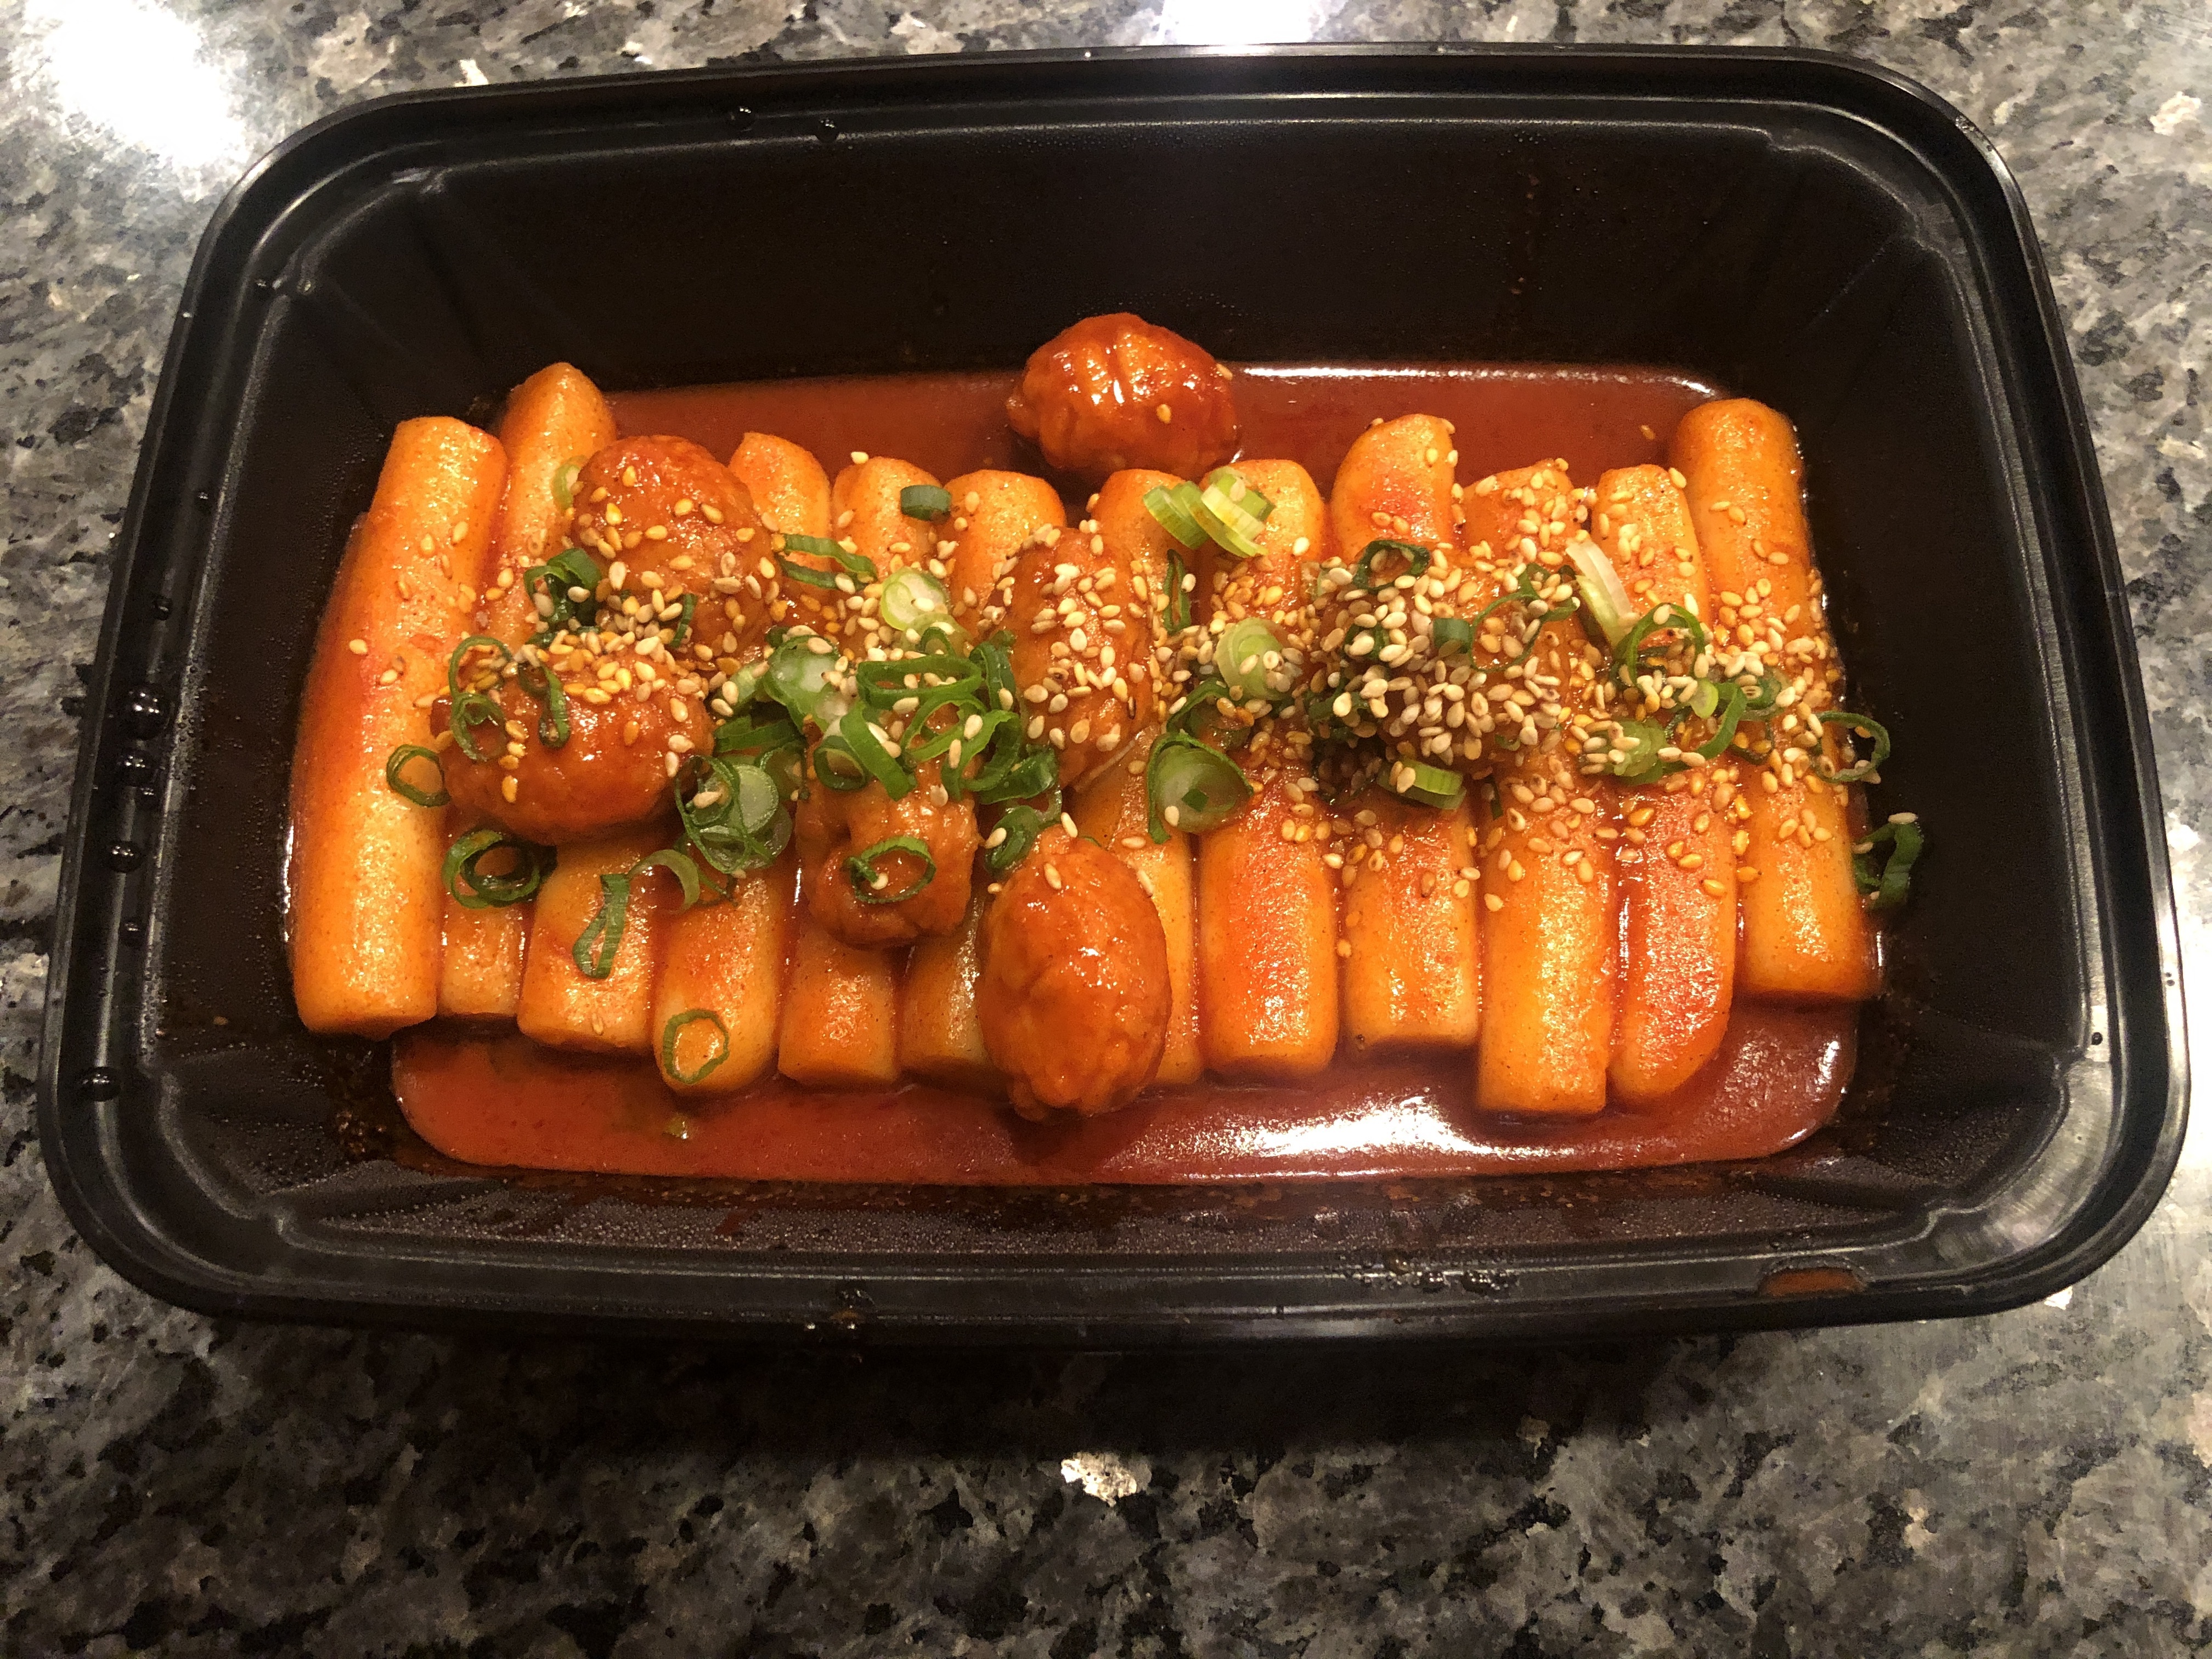 Korean rice cakes in red sauce.